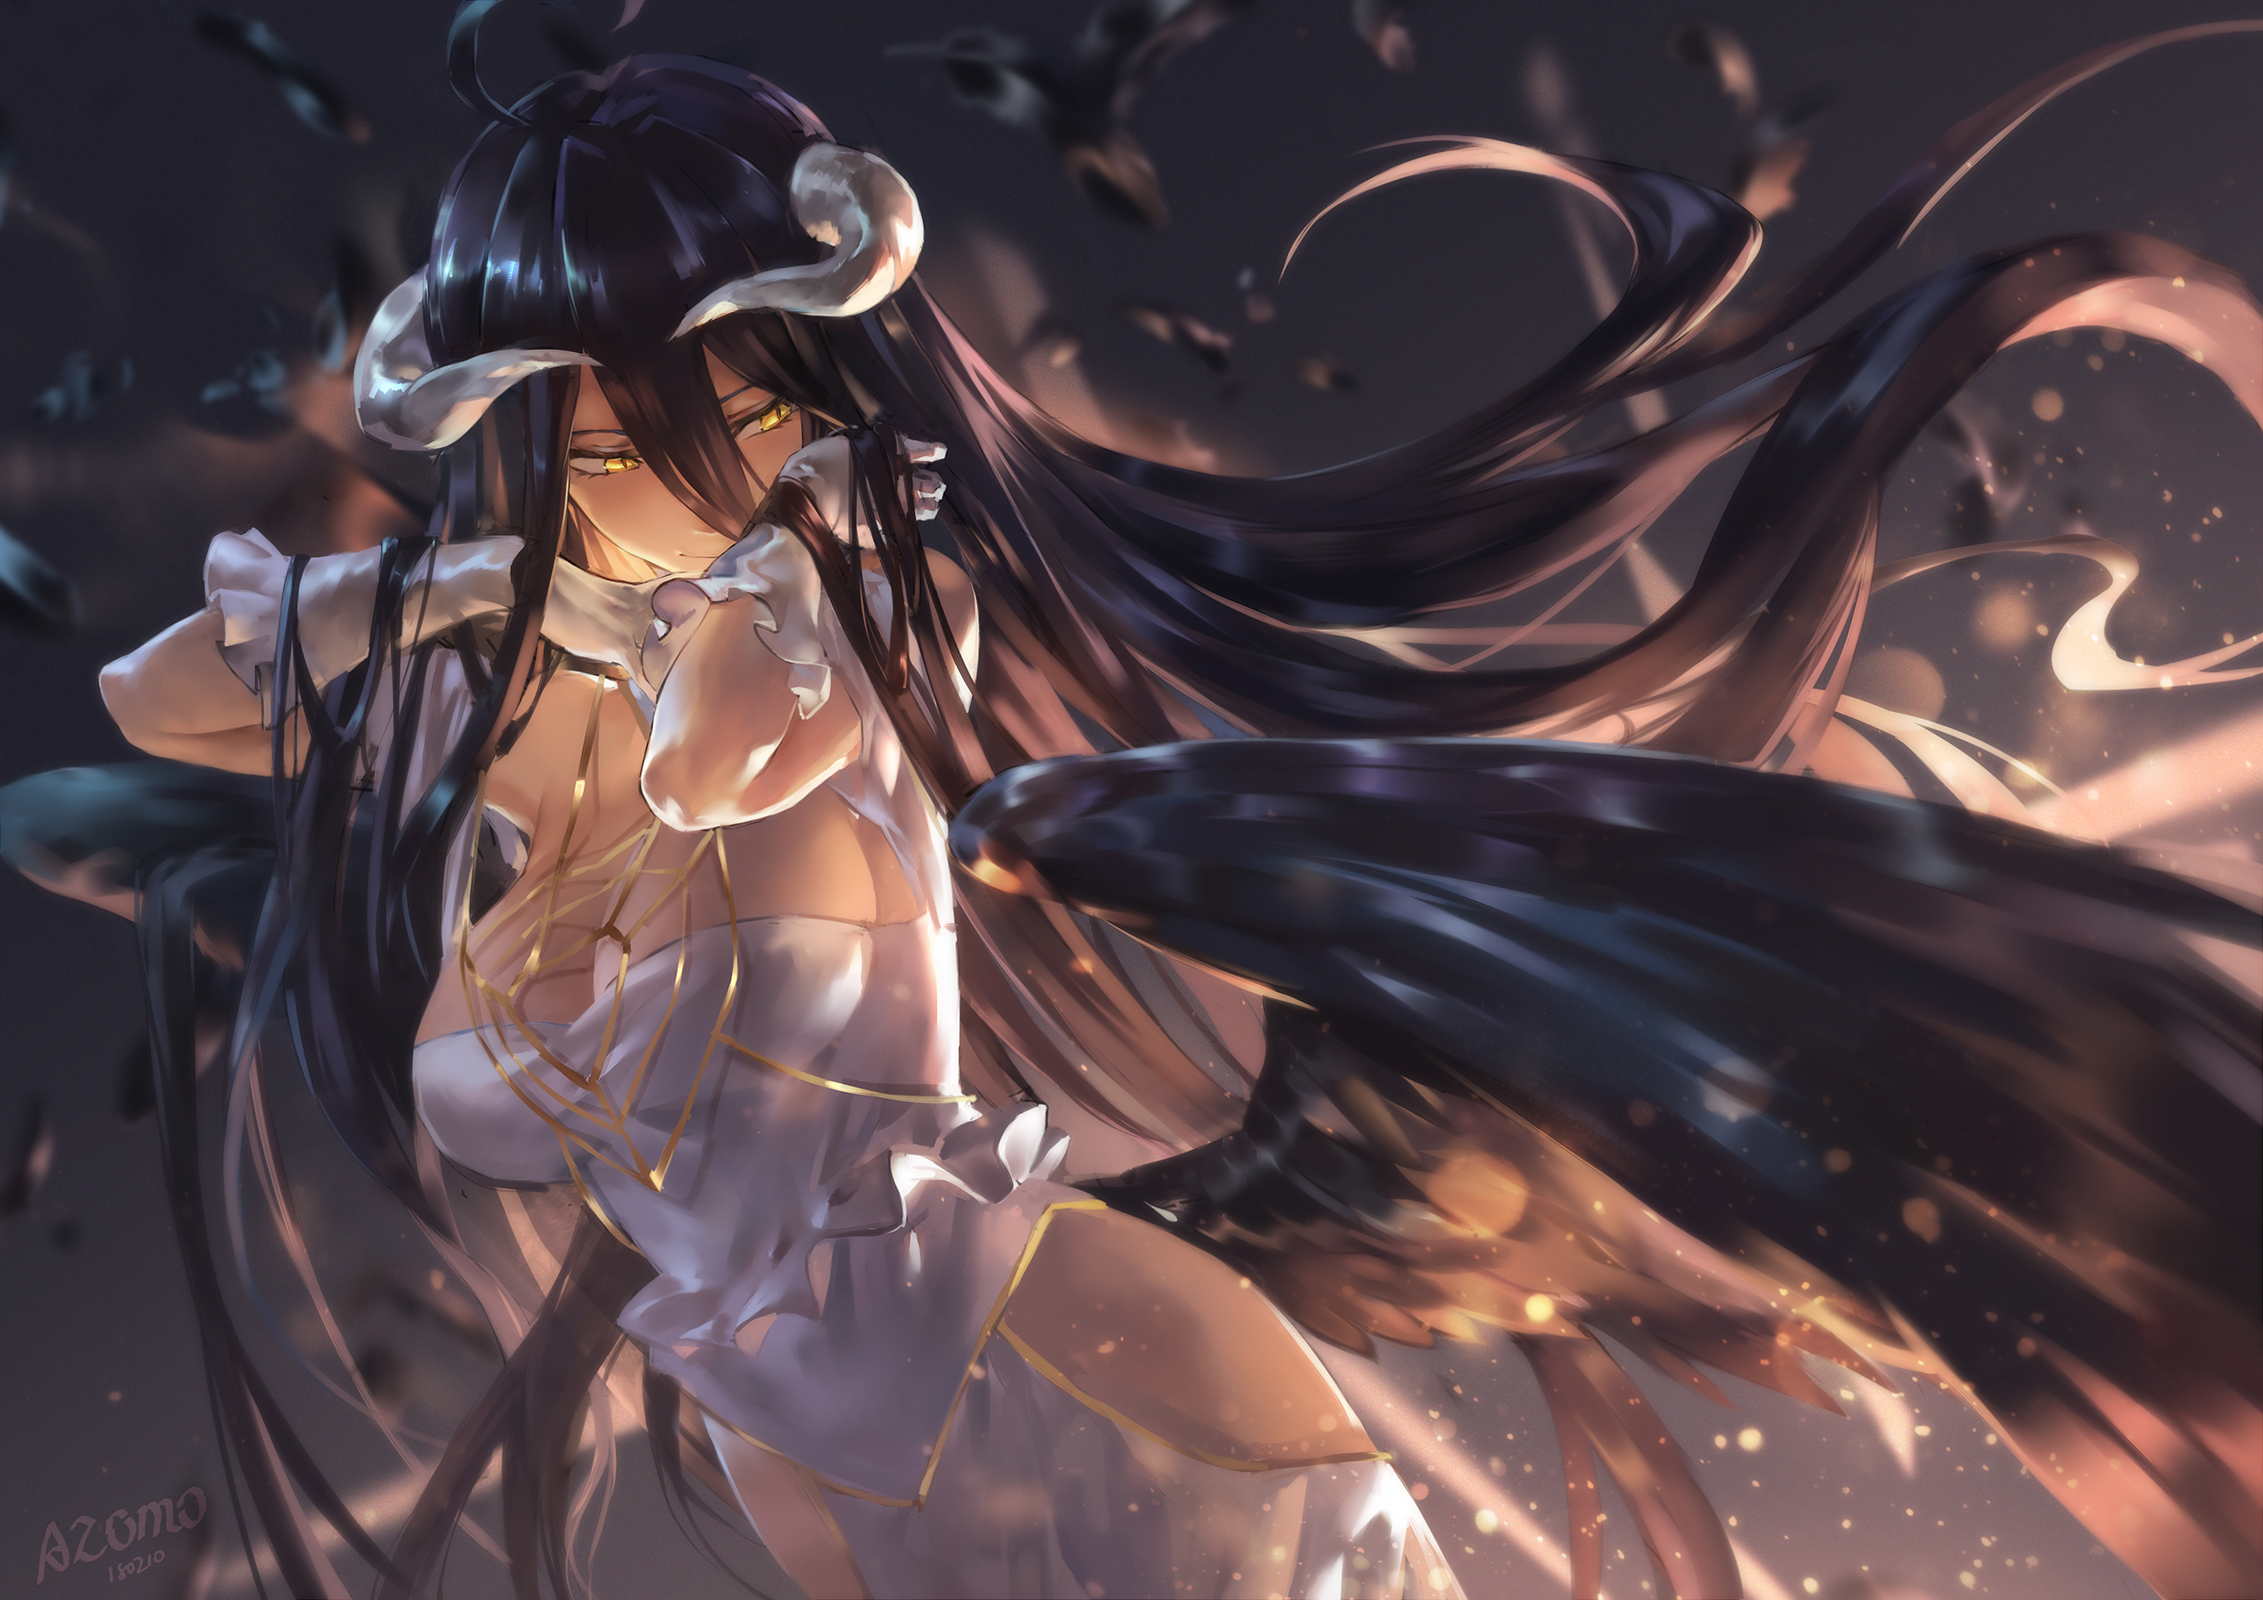 #white Dress, #cleavage, #long Hair, #horns, #azomo, - Overlord Albedo Wallpaper Hd , HD Wallpaper & Backgrounds